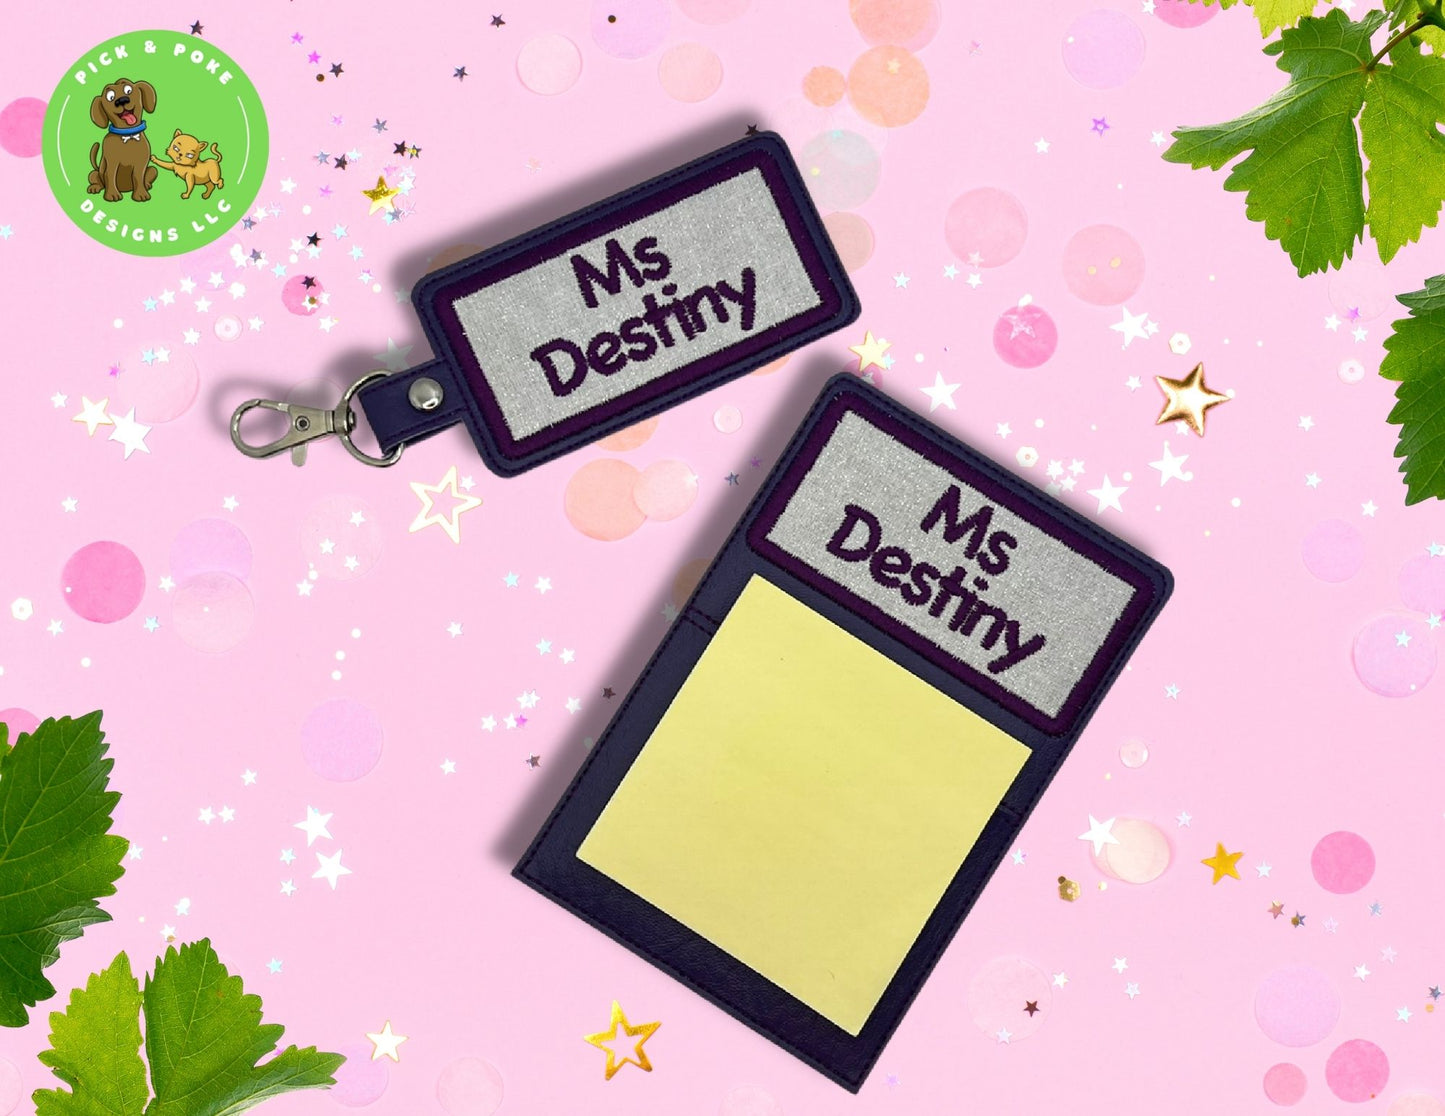 Personalized Sticky Note Pad Holder and Matching Key Chain Set (includes sticky notes)